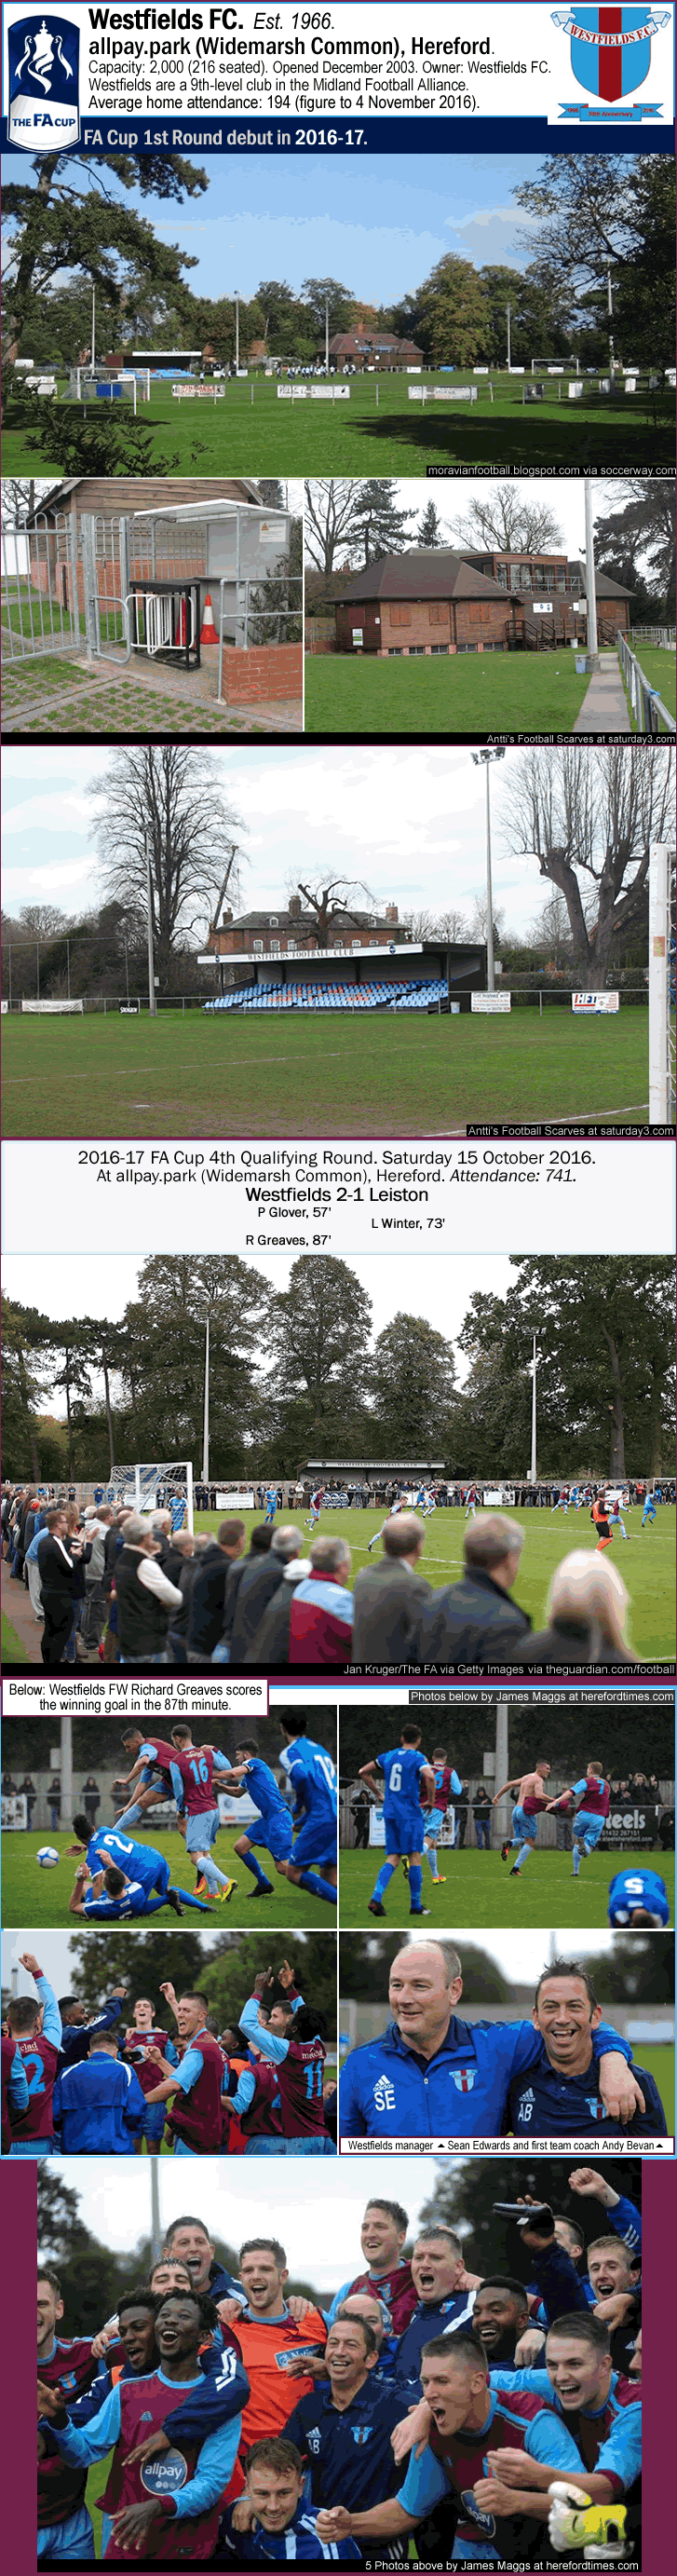 westfields-fc_allpay-park_widemarsh-common-hereford_2016-17_fa-cup_1st-round_cup-debut_h_.gif